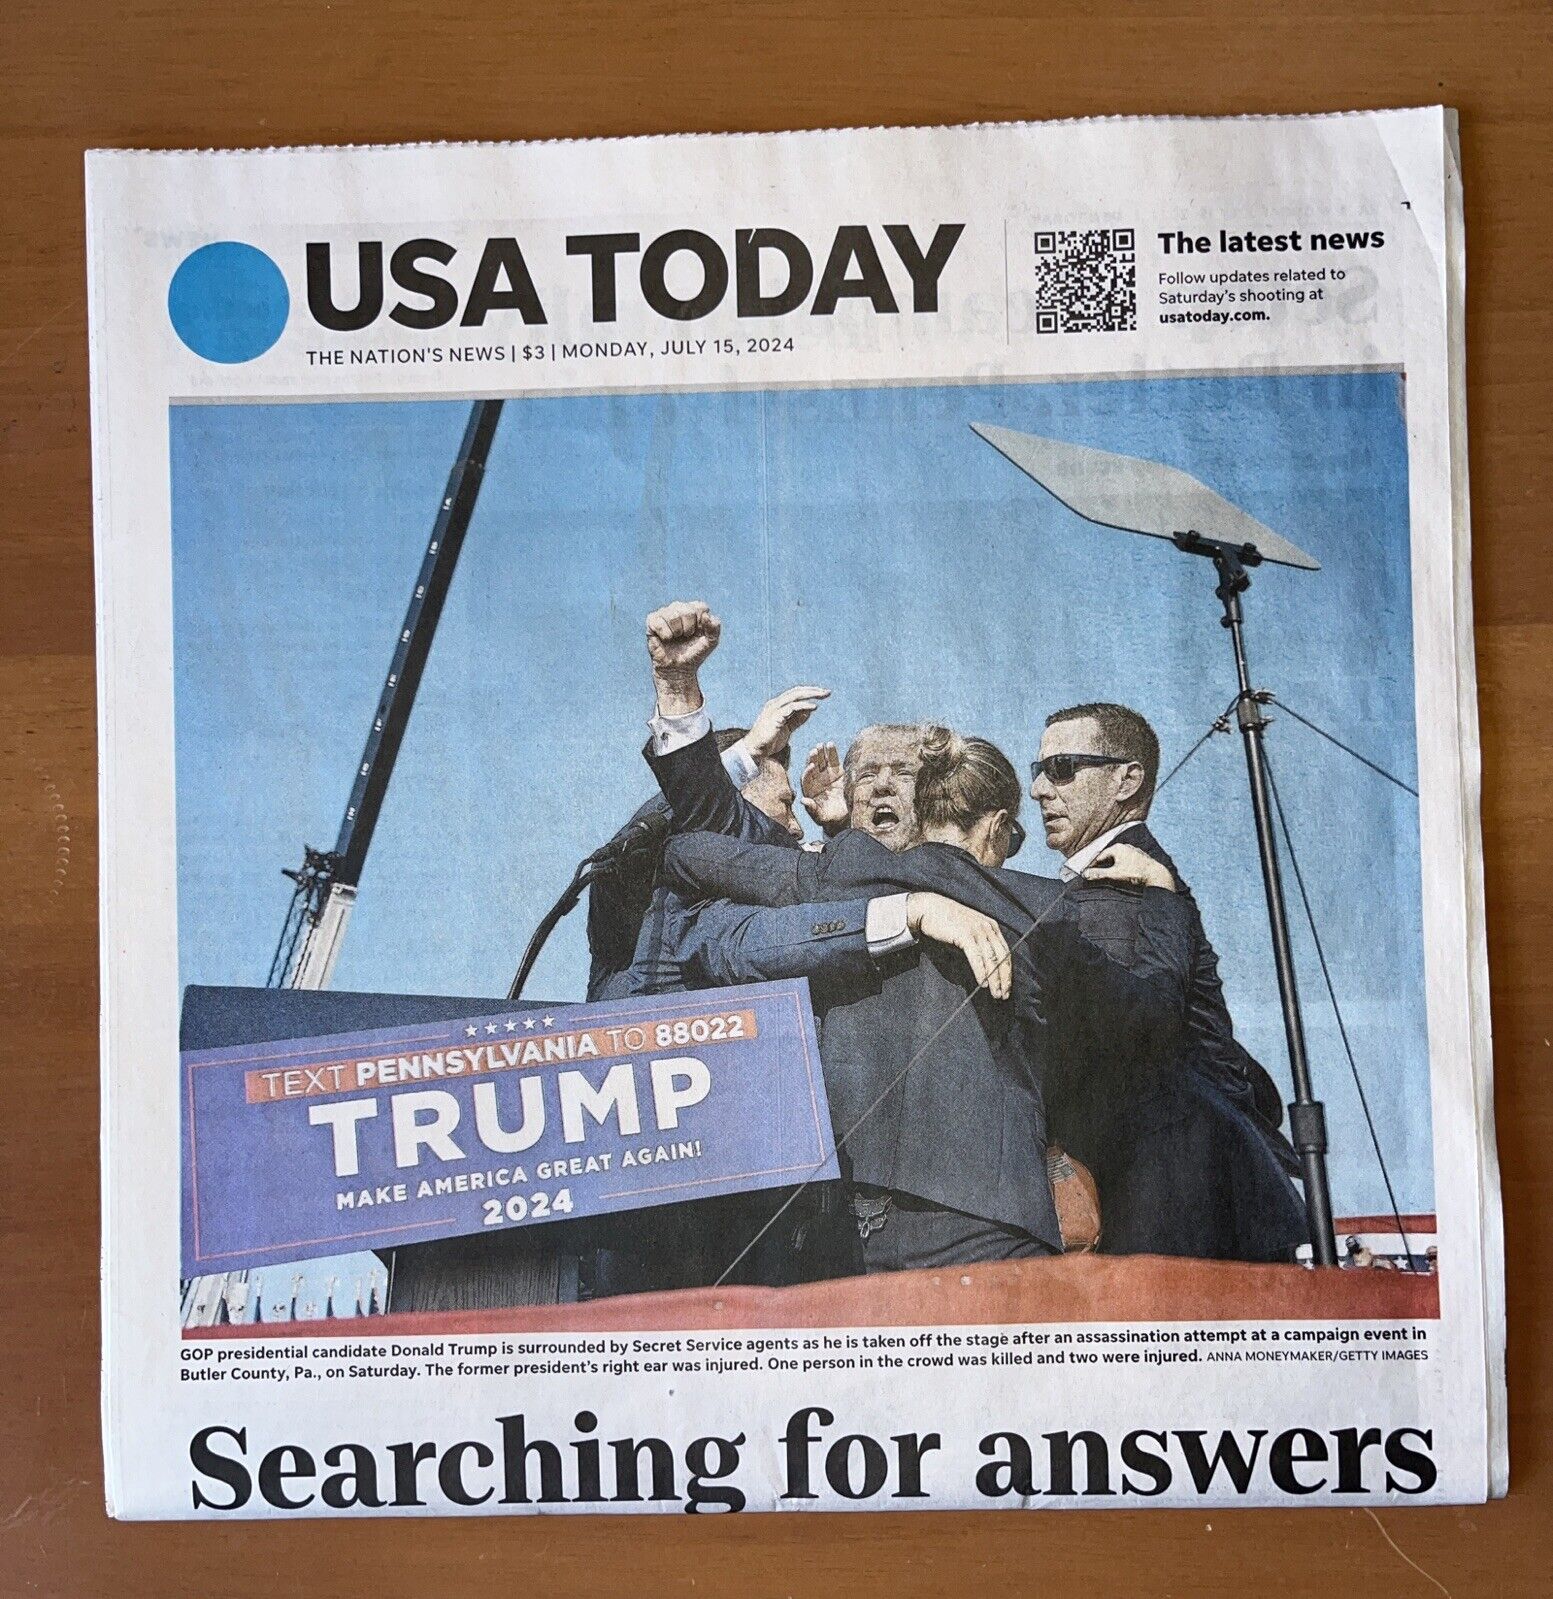 Trump July 15 2024 USA Today - “Searching For Answers” - Historical Newspaper